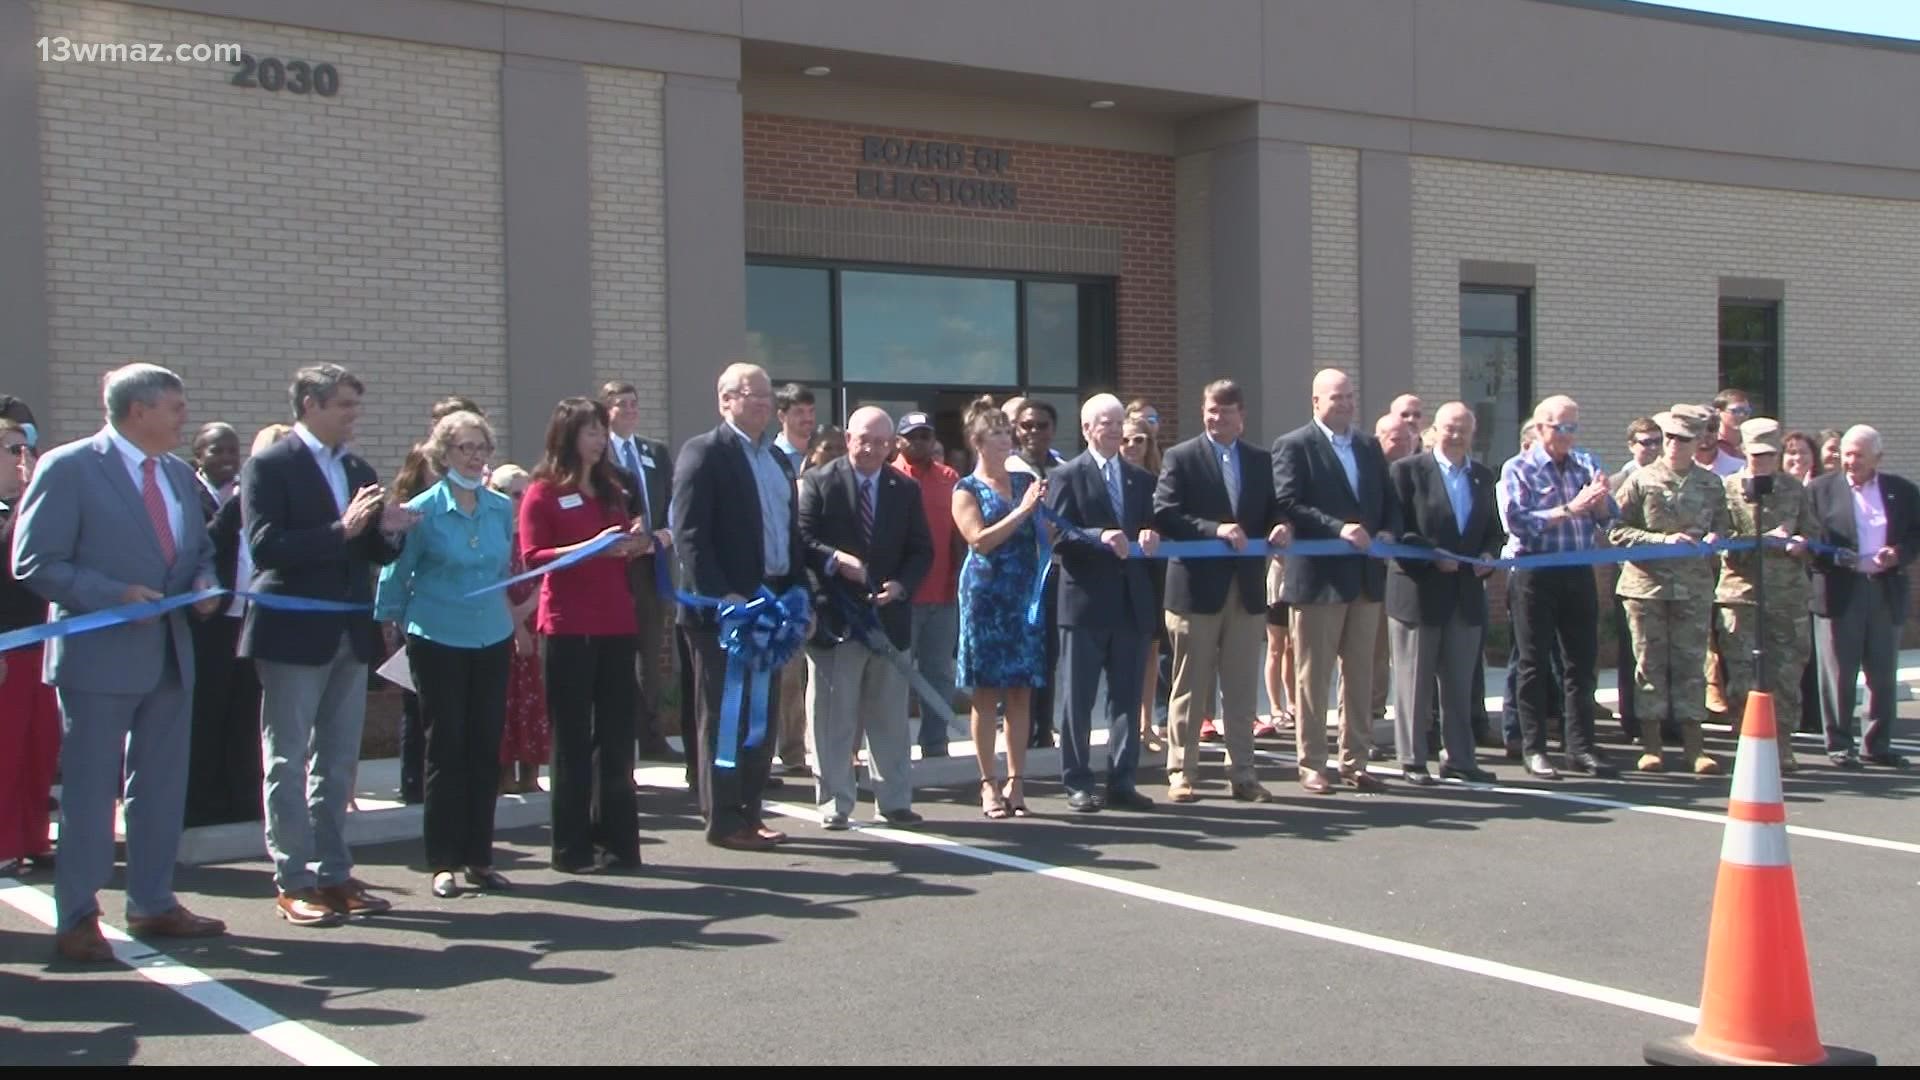 On Wednesday, county officials and employees gathered on Kings Chapel Road in Perry to open the new county government building.